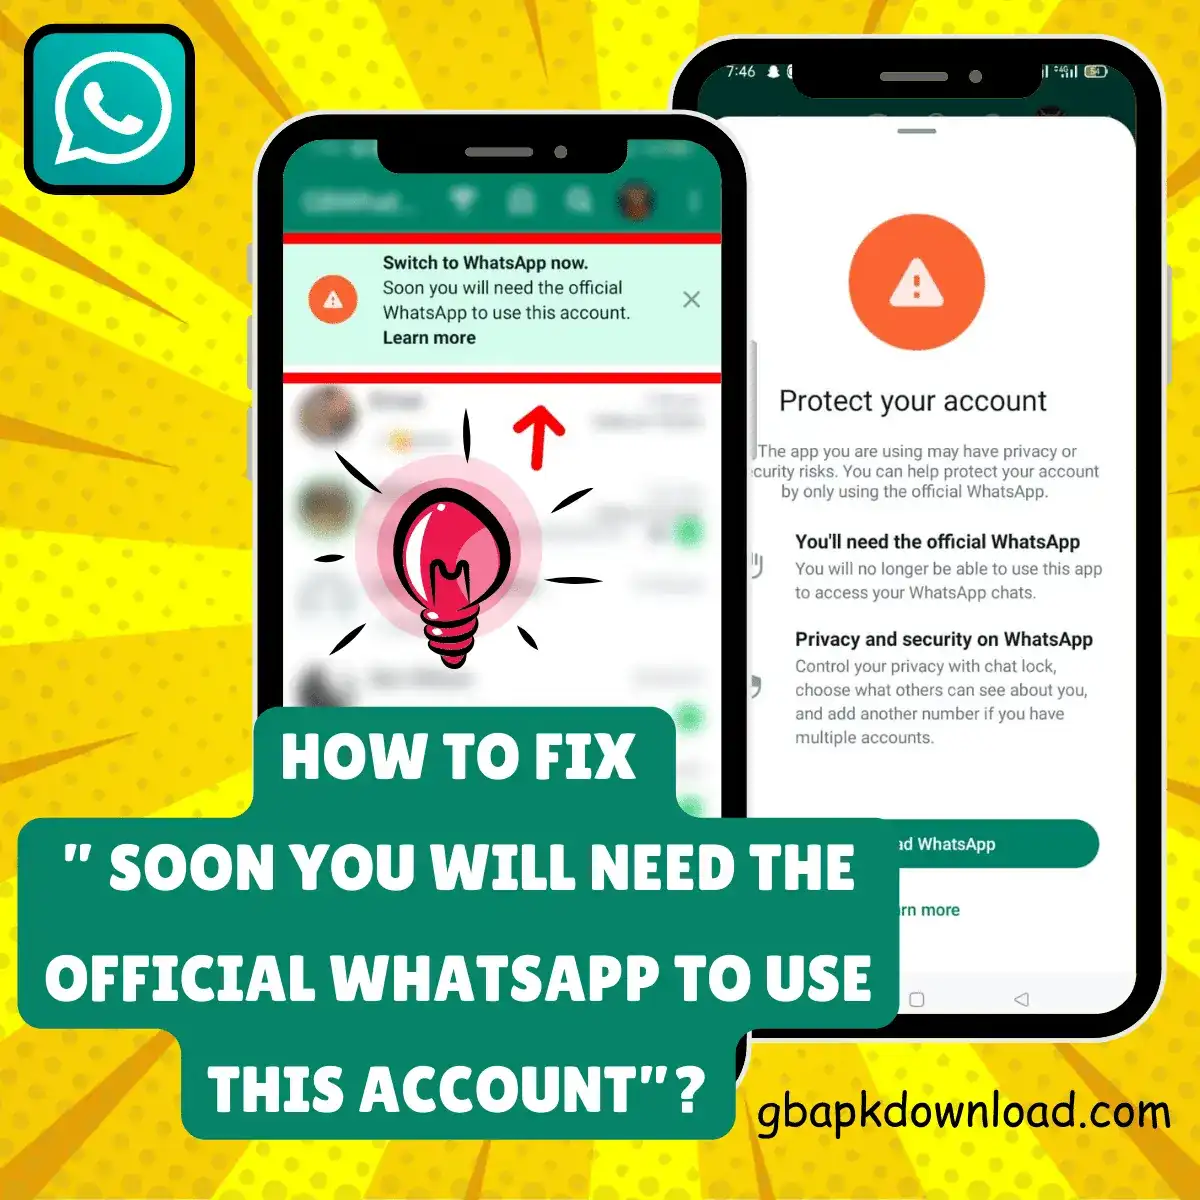 How to Fix ” Soon you will need the official WhatsApp to use this Account” in GB WhatsApp APK